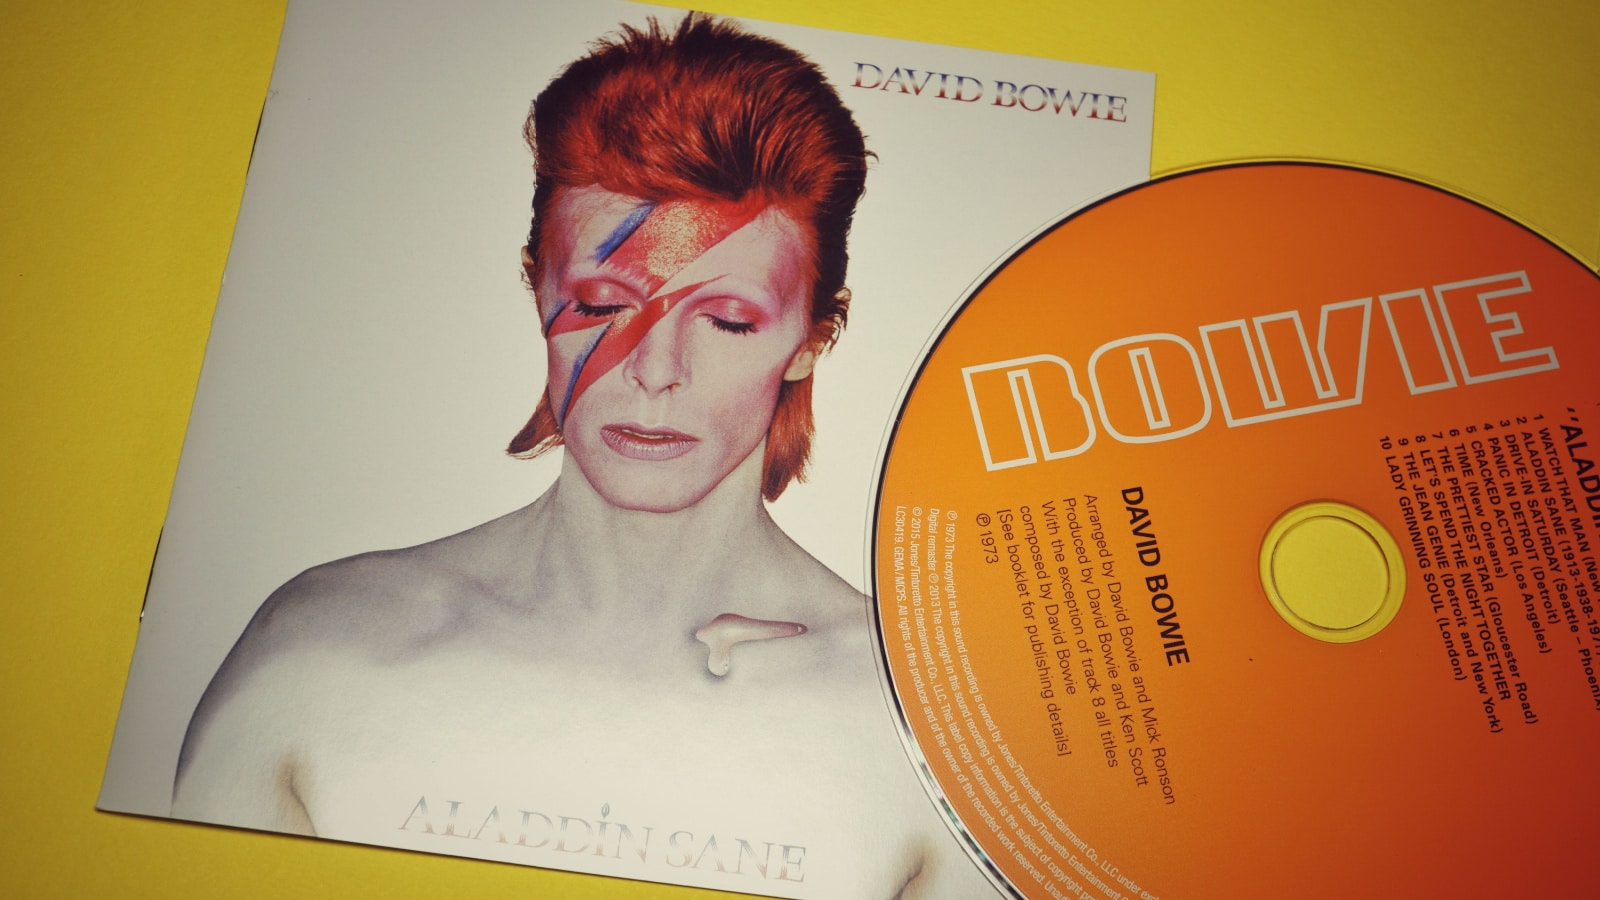 Rome, Italy - 02 October, 2021, detail of Aladdin Sane, album by British artist David Bowie, released in 1973 by RCA Records and reissued on compact disc for the first time in 1984.